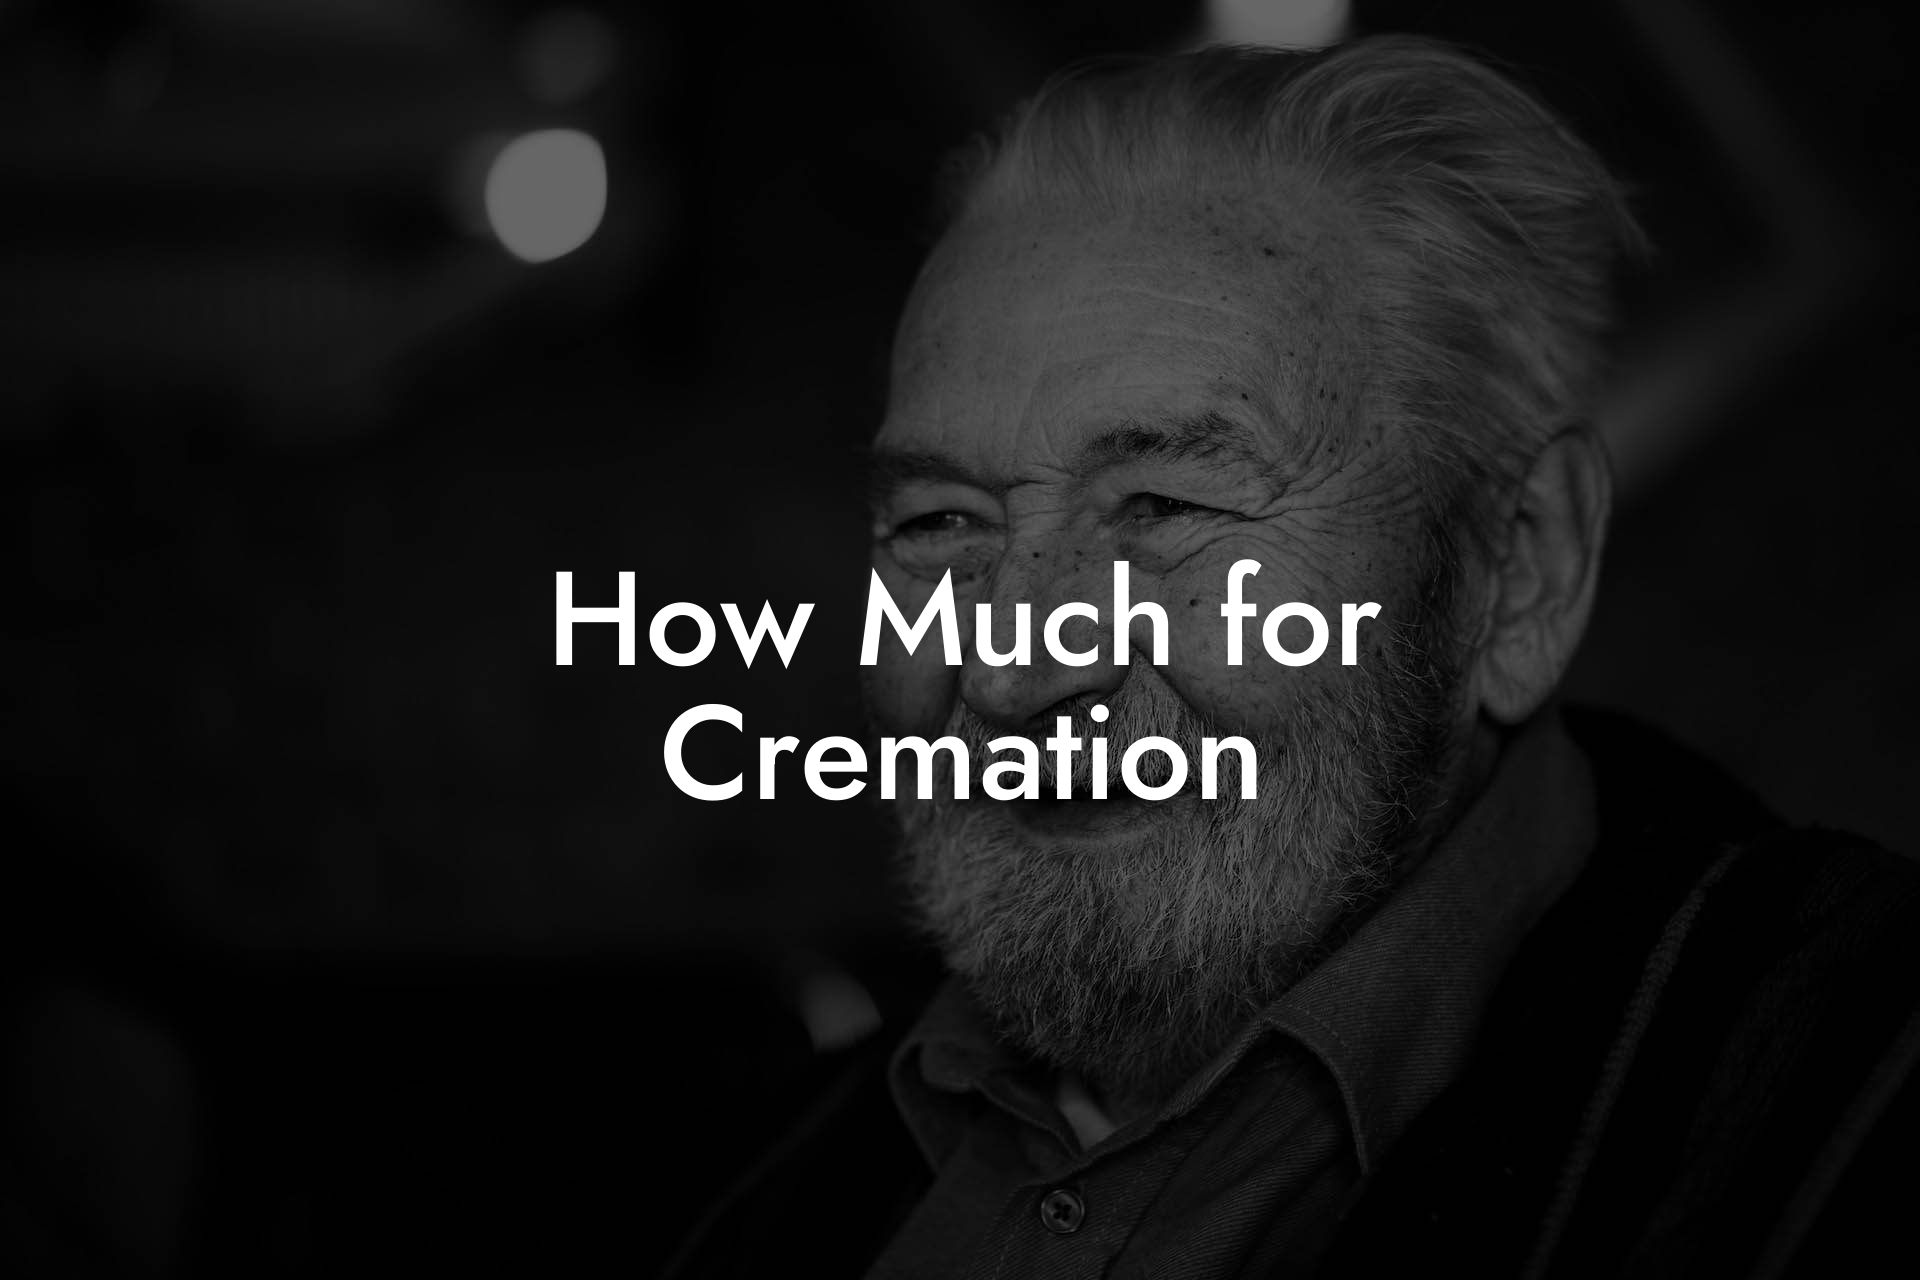 How Much for Cremation